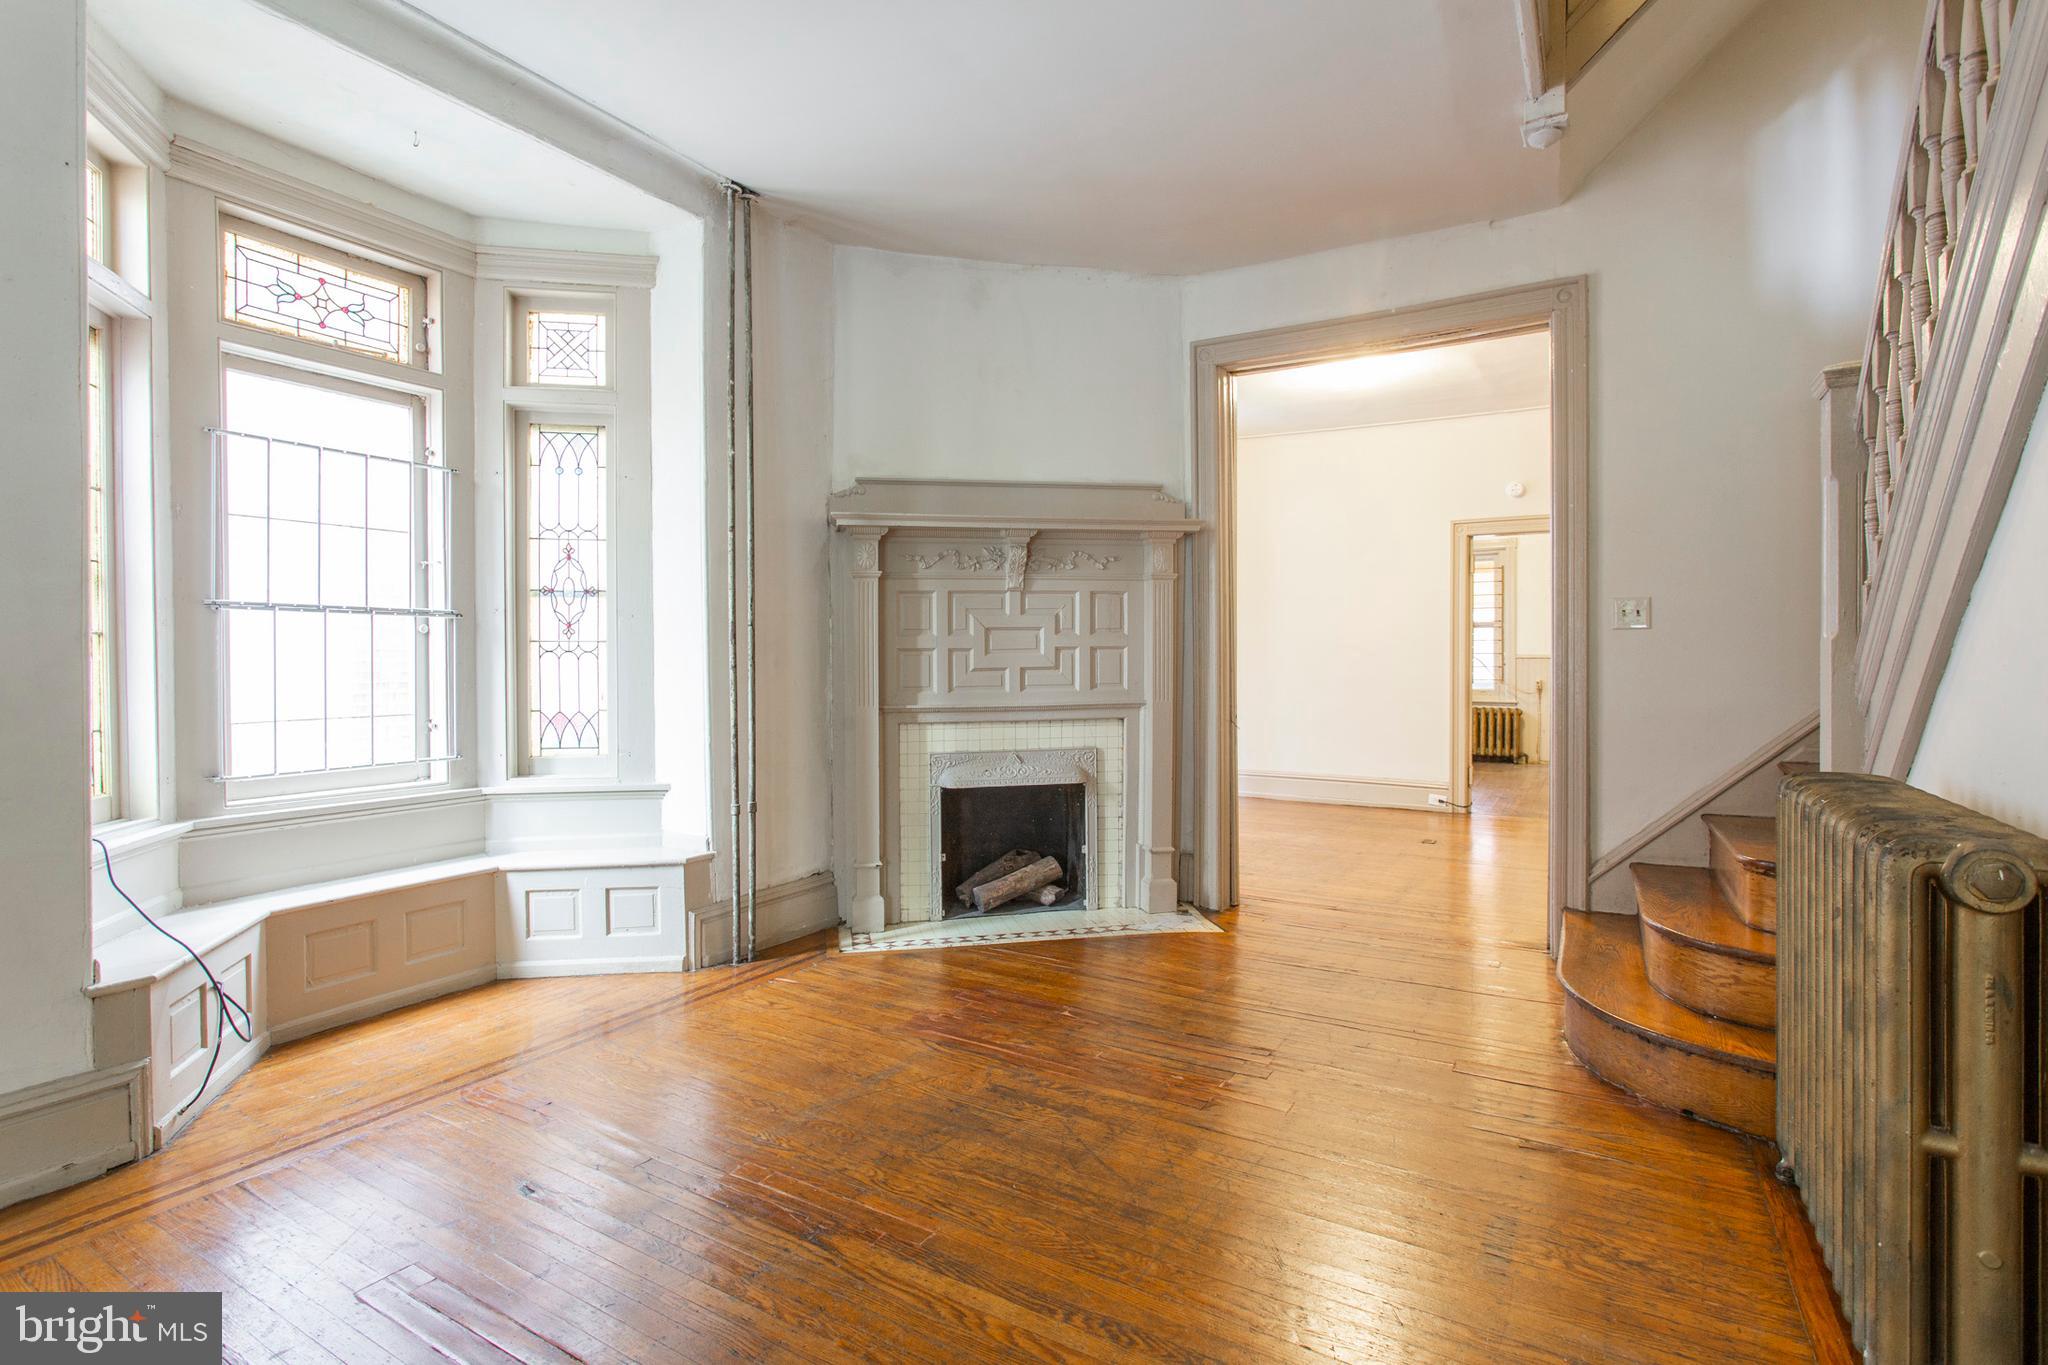 wooden floor fireplace and windows in an empty room